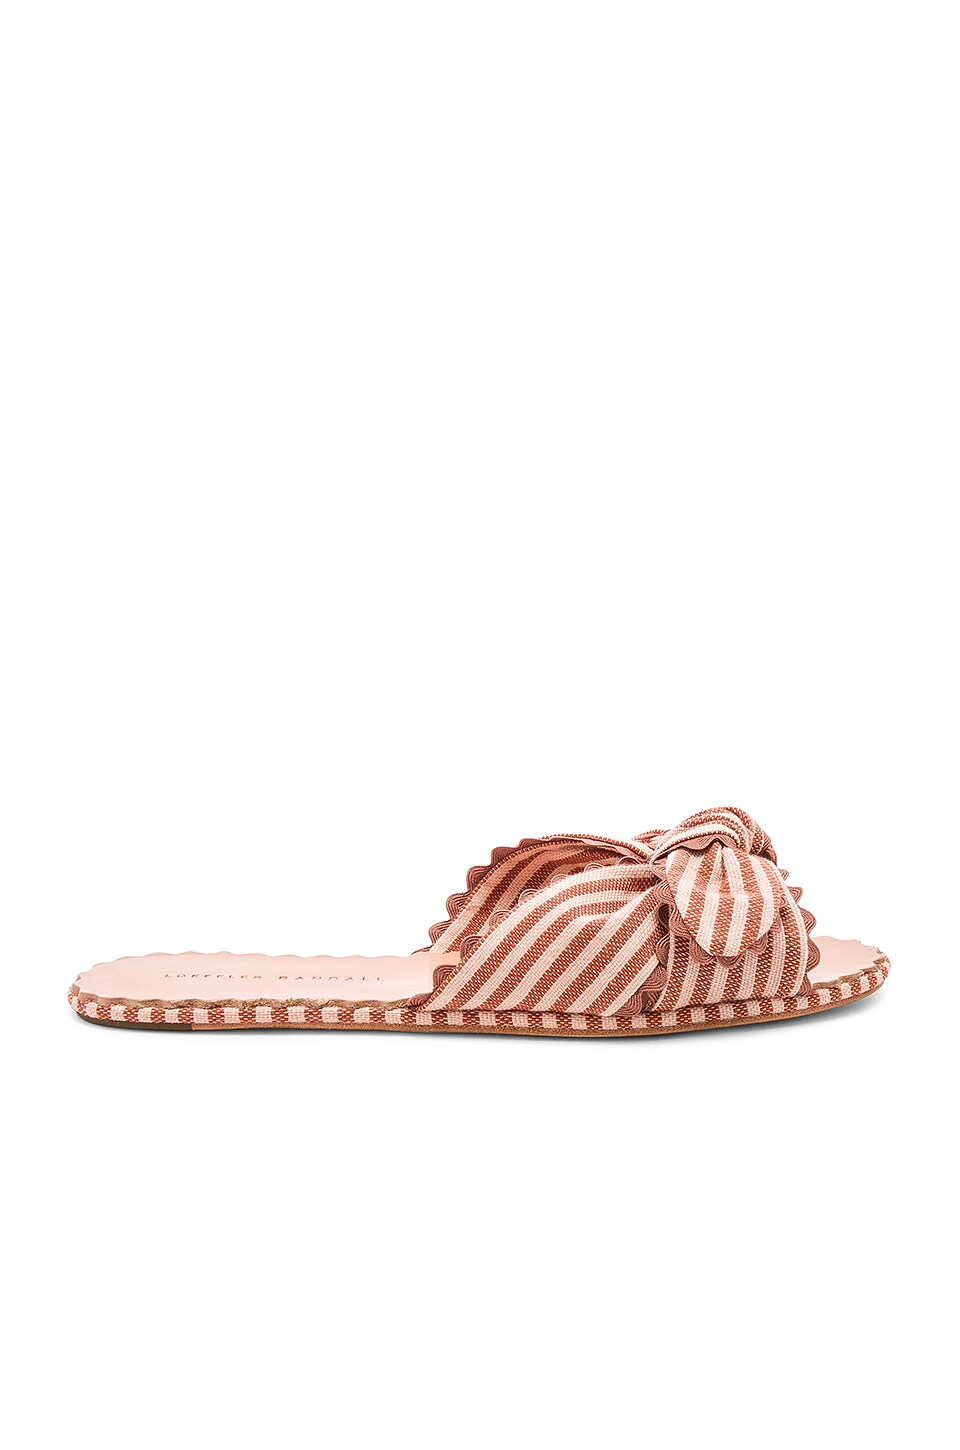 LOEFFLER RANDALL SHIRLEY KNOTTED RIC RAC SLIDE WITH SCALLOPED EDGE